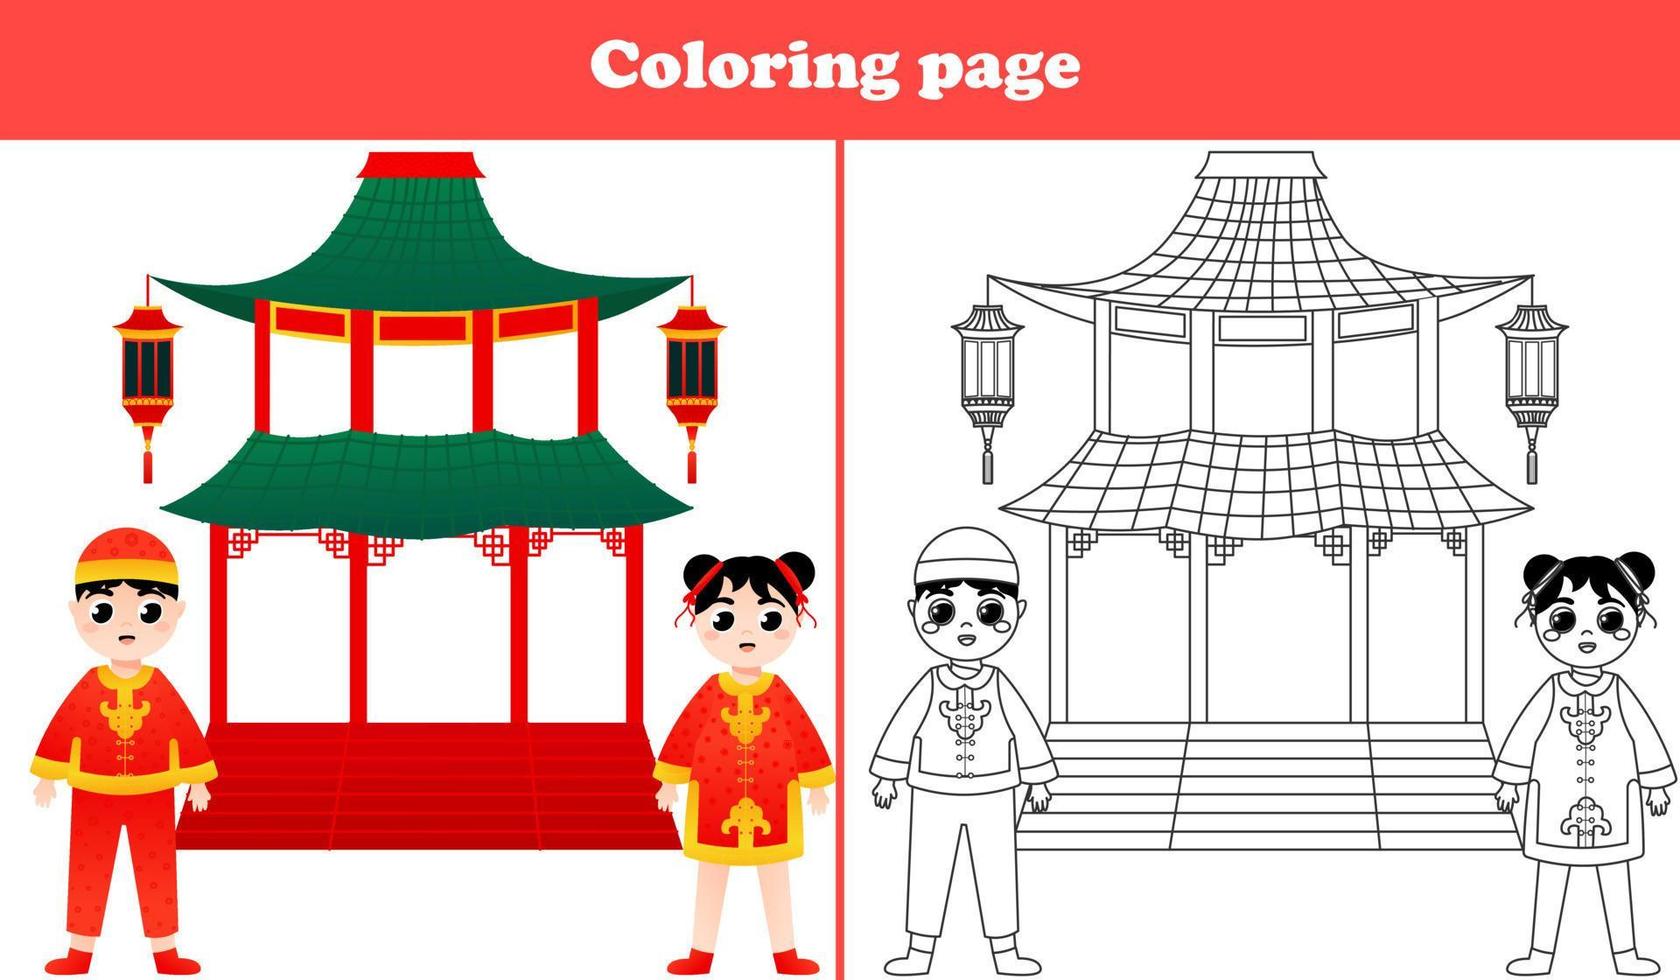 Printable worksheet with coloring page for kids with cute girl and boy in national costume with Asian building and lantern in cartoon style vector